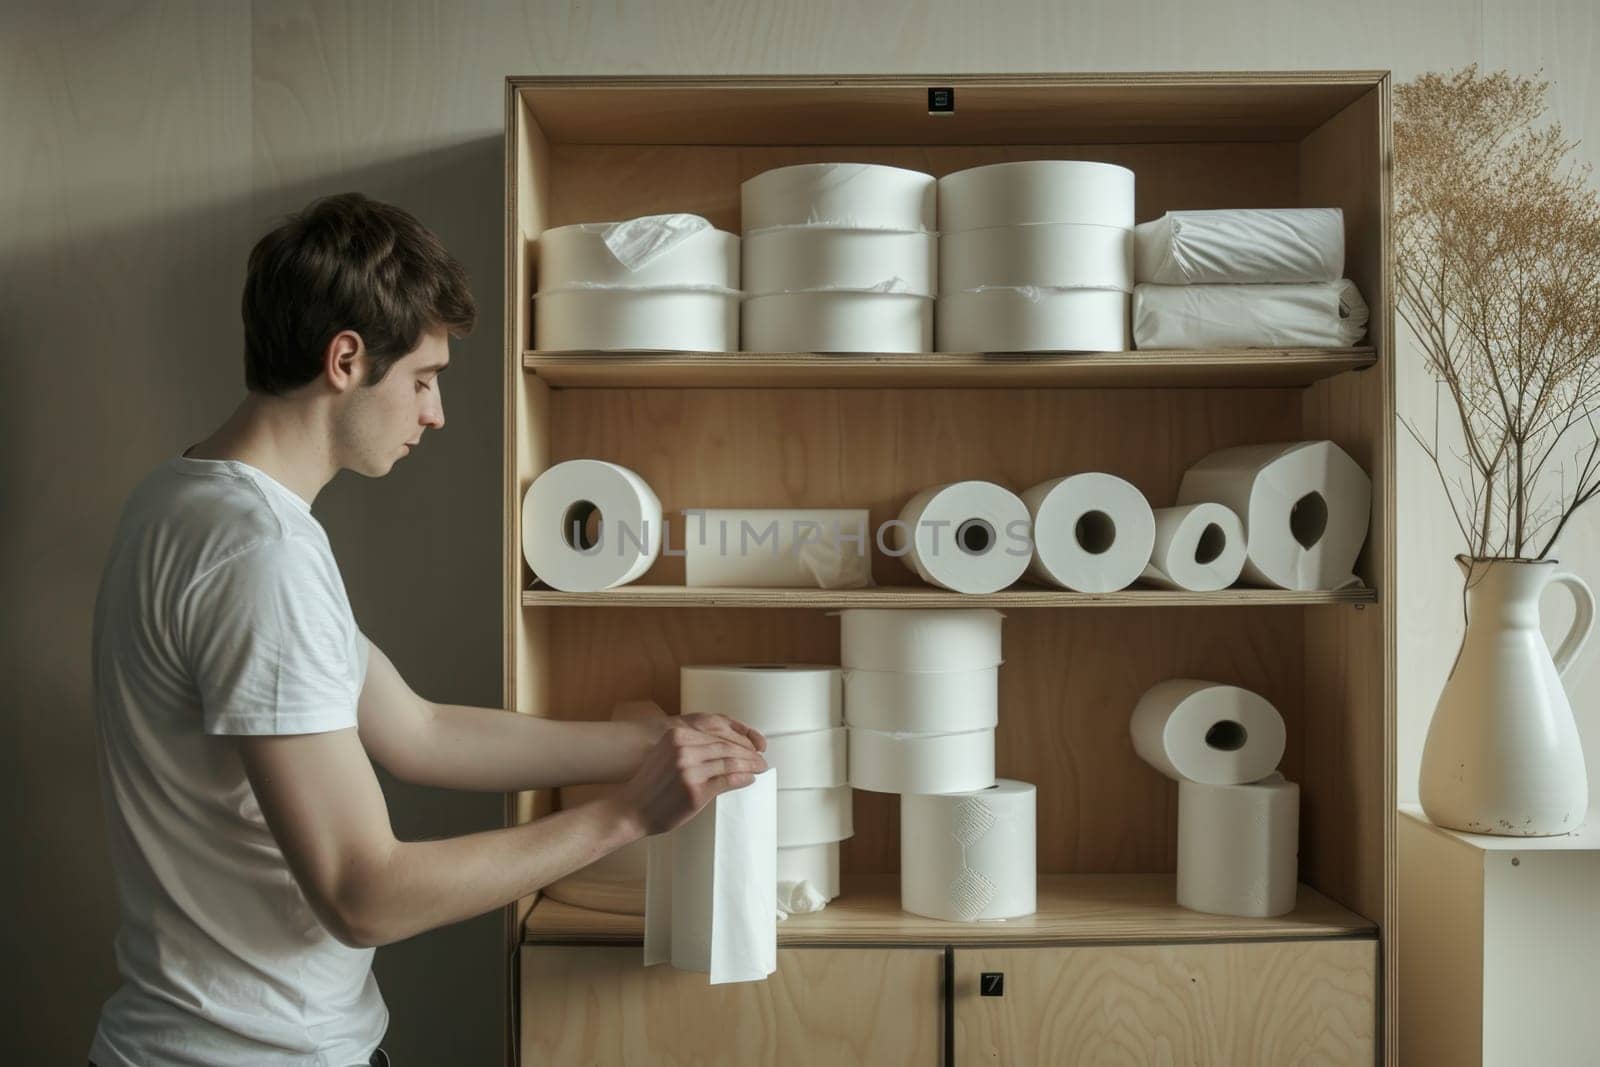 A man near a shelf with toilet paper rolls in the room.